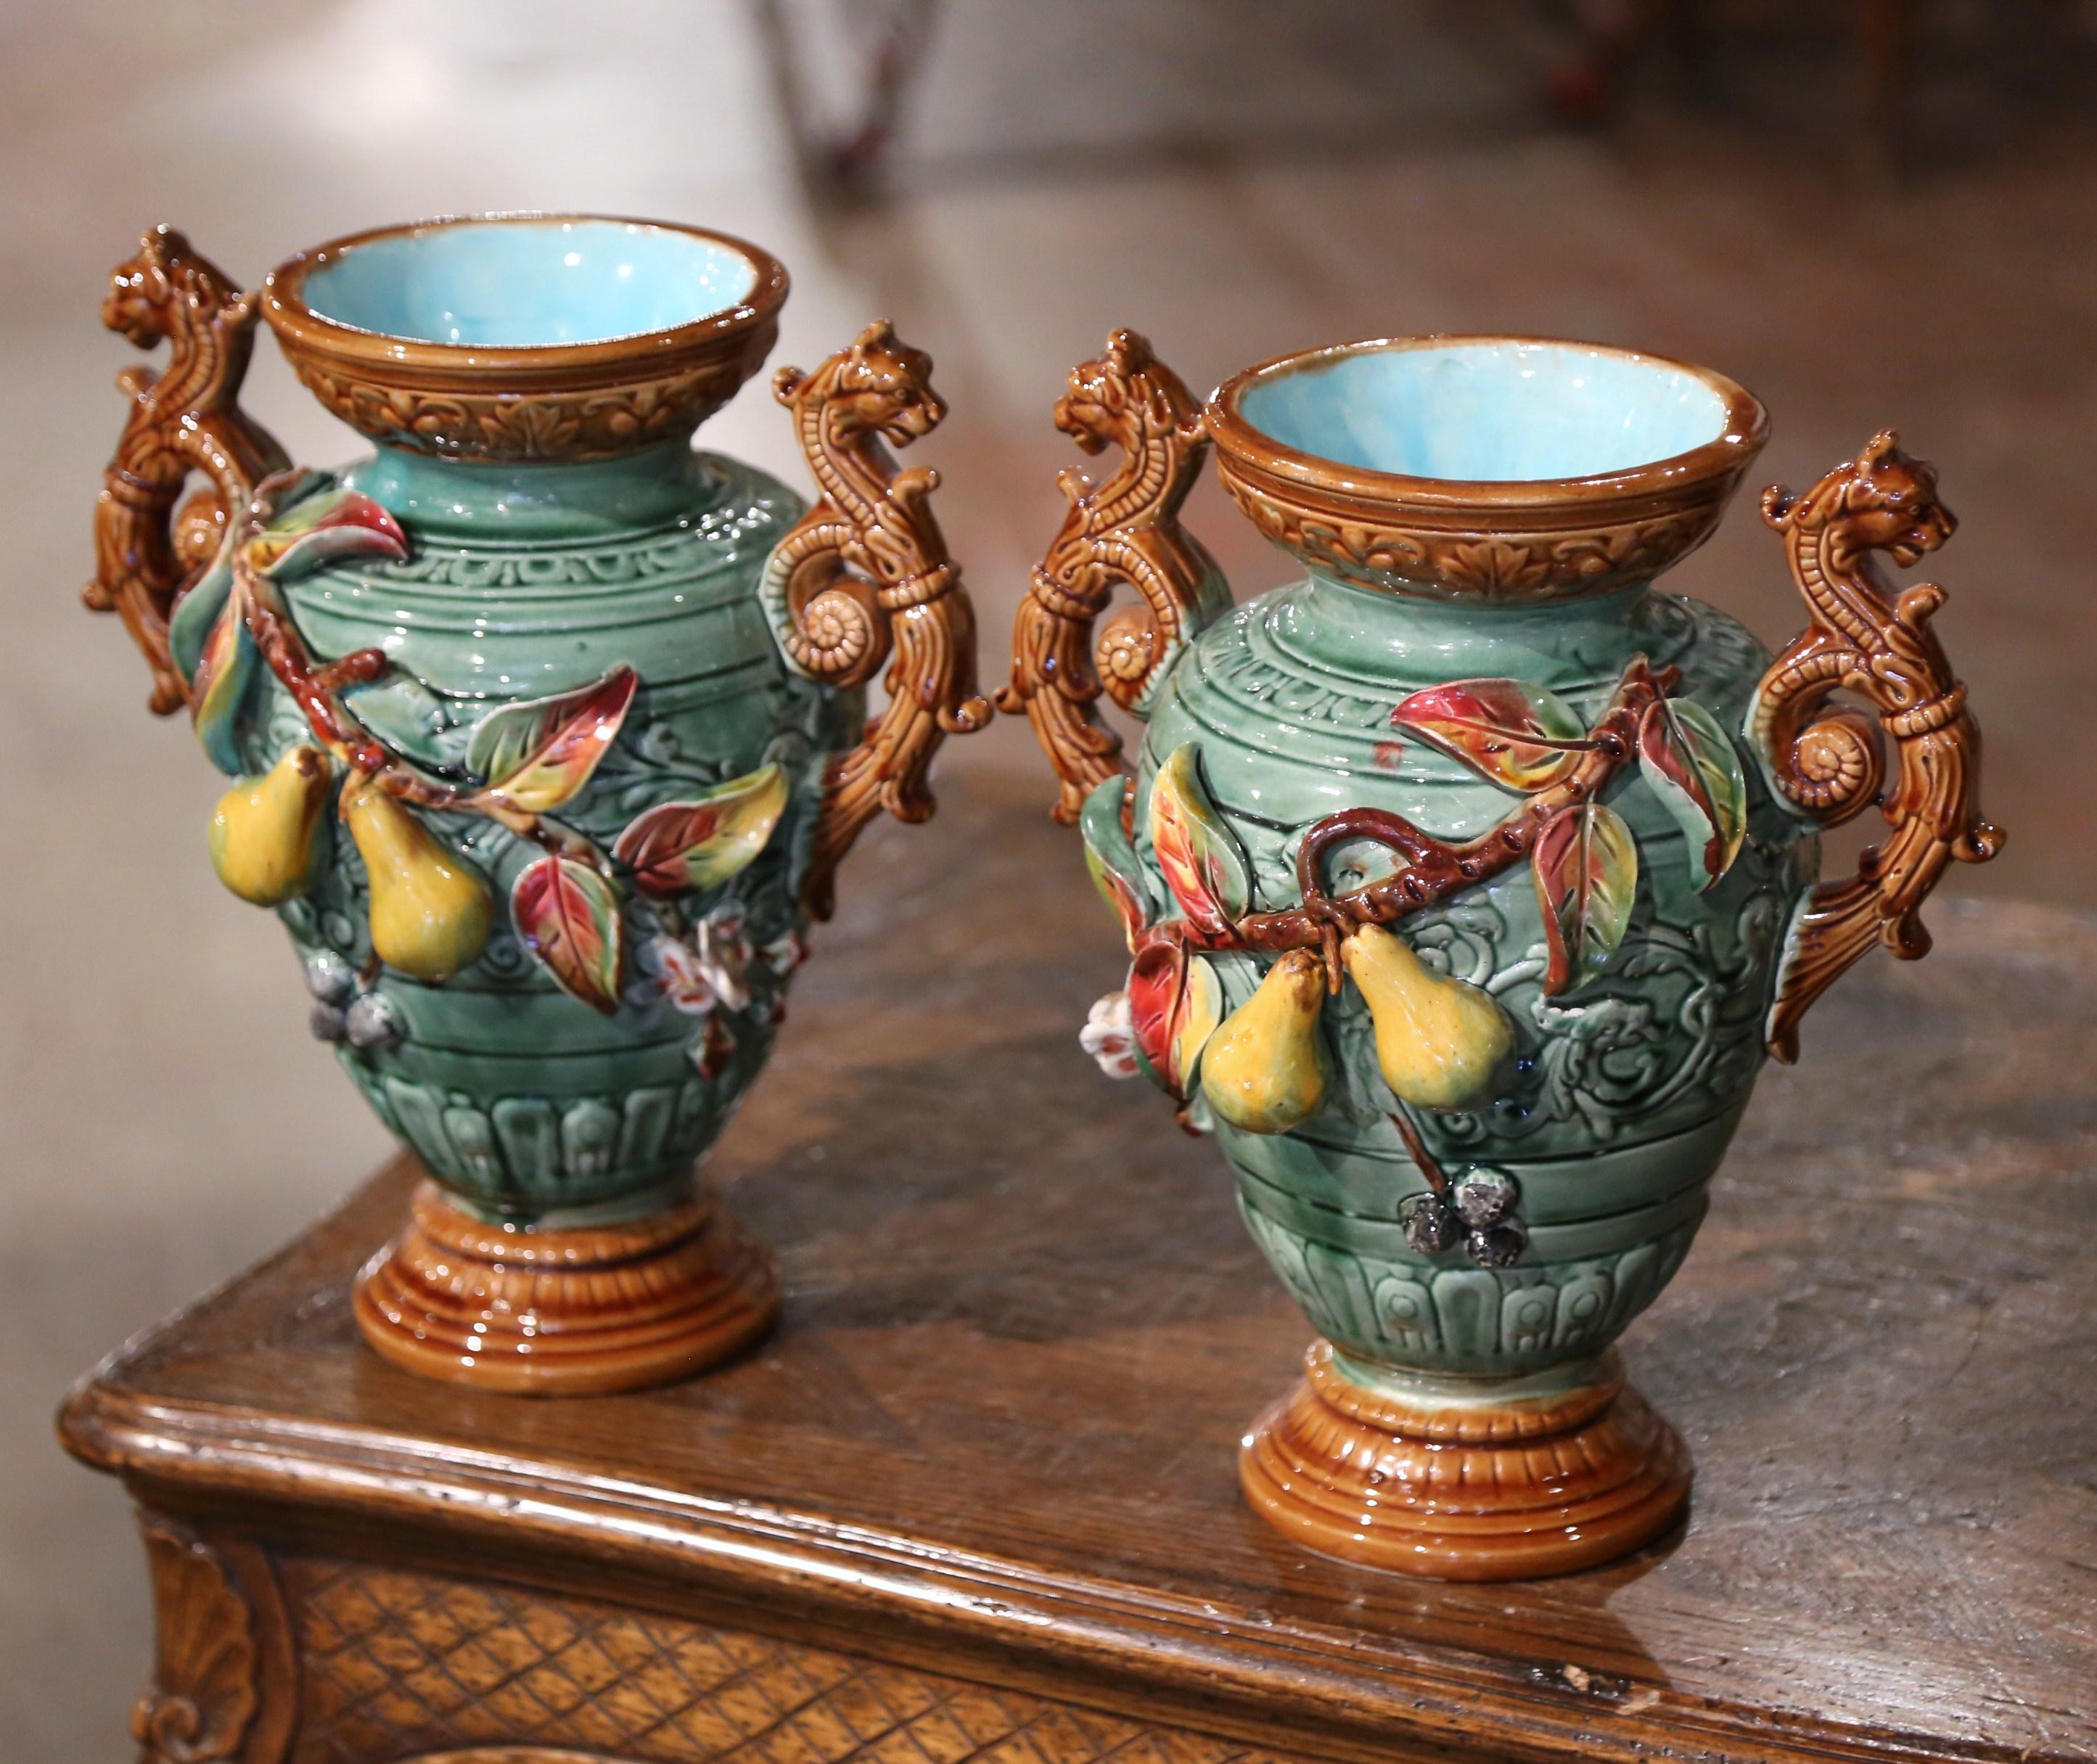 Bring colors to your mantel with this pair of antique Majolica vases with fruit motifs. Crafted in Southern France, circa 1880, this ceramic composition is a Classic example of barbotine artistry. The sculptural and colorful vessels are decorated